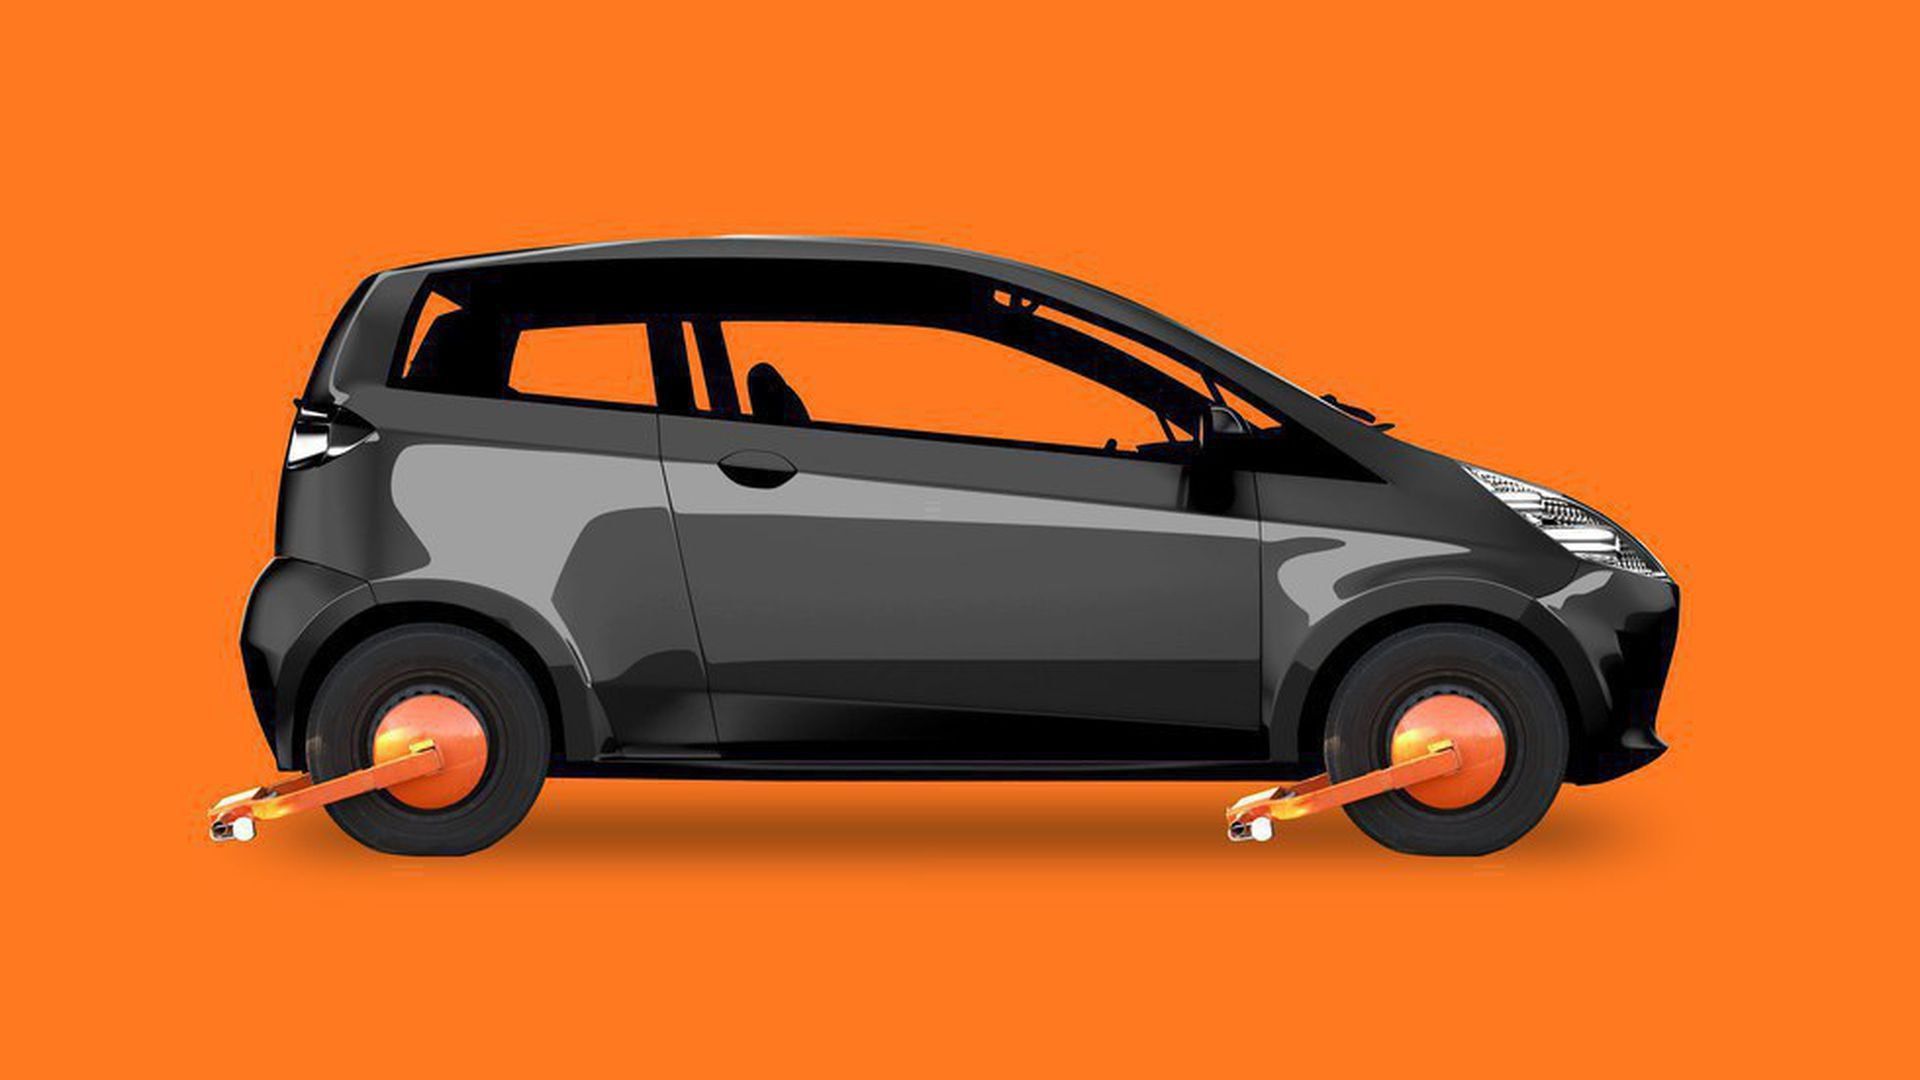 Illustration of car with locks on the wheels rendering it unusable